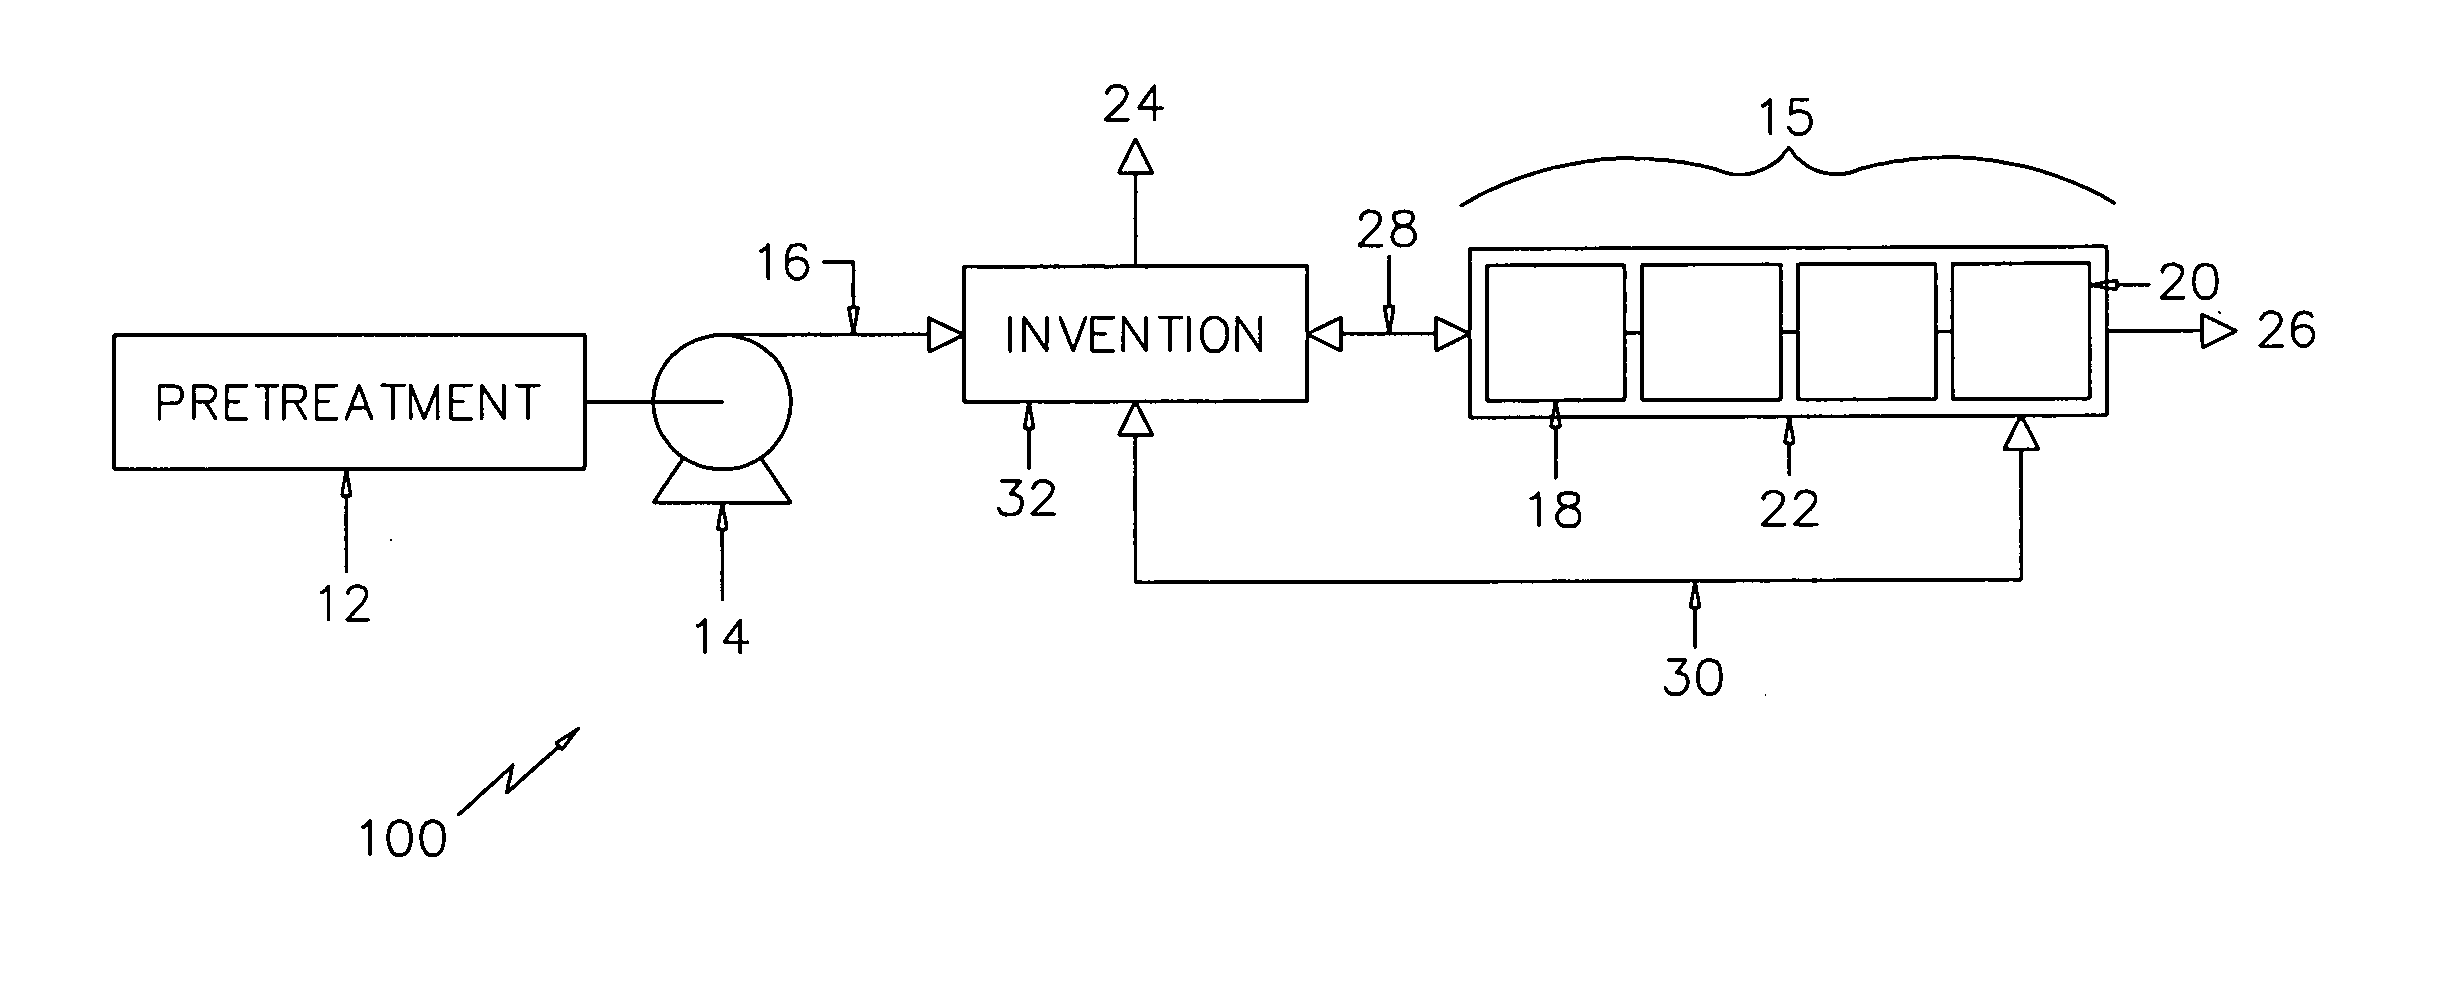 Reverse osmosis filter flush device and method